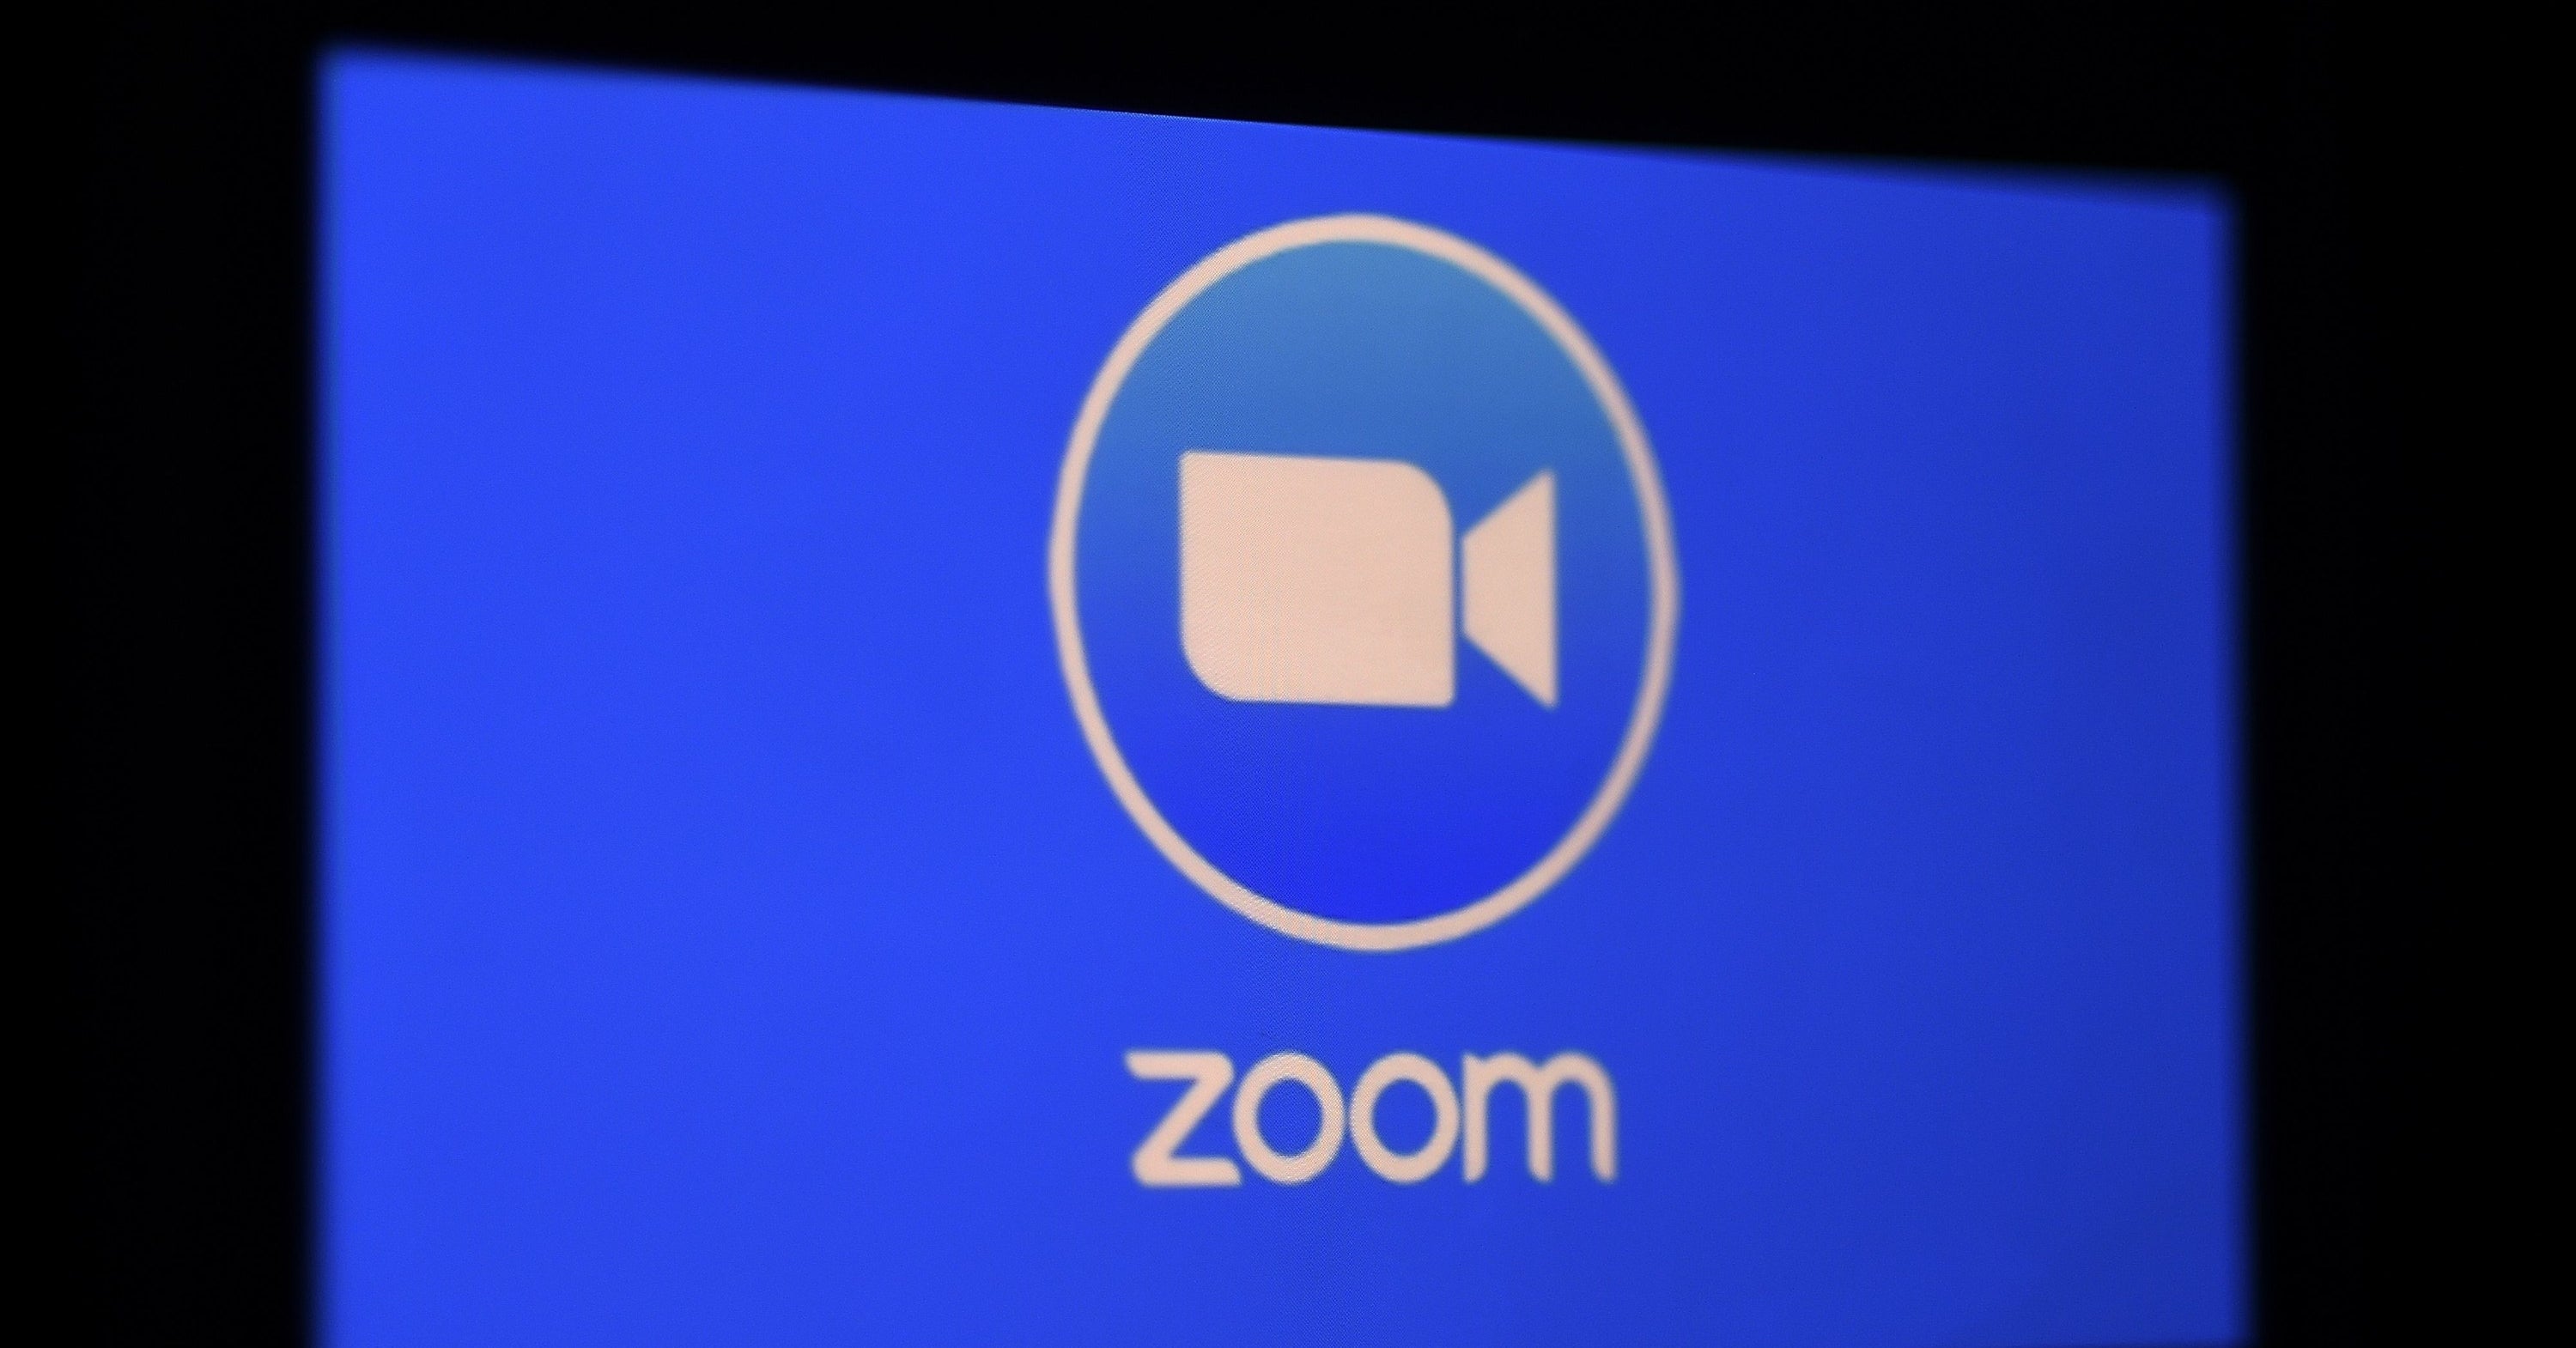 Zoom Deleted Events Discussing Zoom “Censorship”